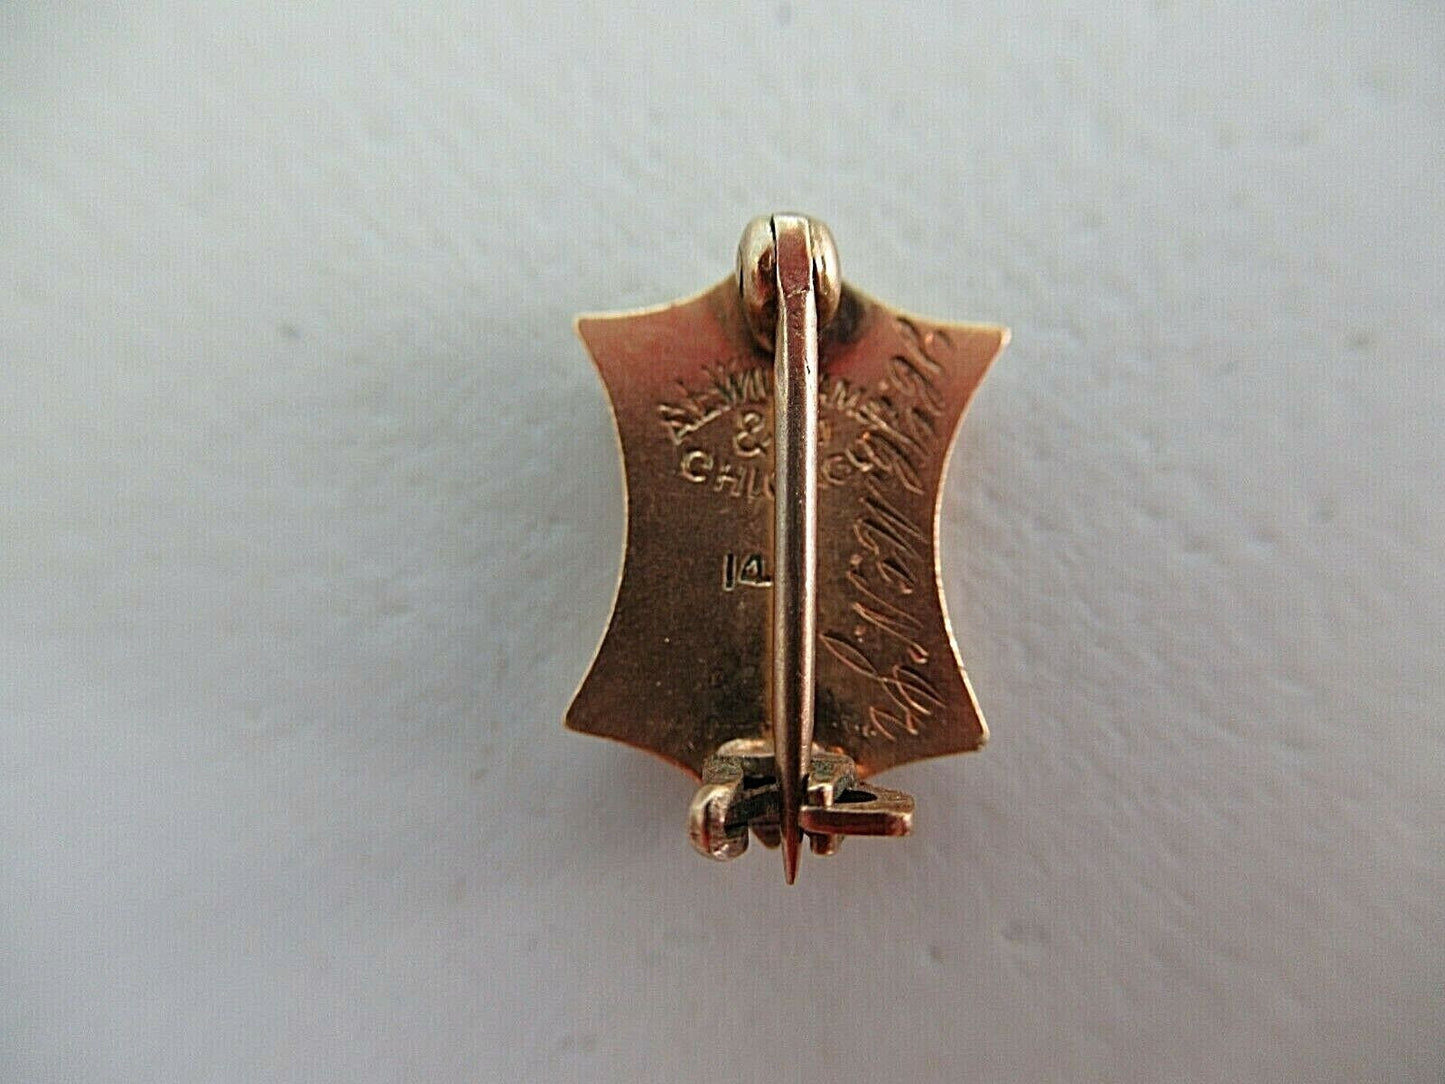 USA FRATERNITY THETA PHI DELTA. MADE IN GOLD 14K. NAMED. MARKED. EARLY